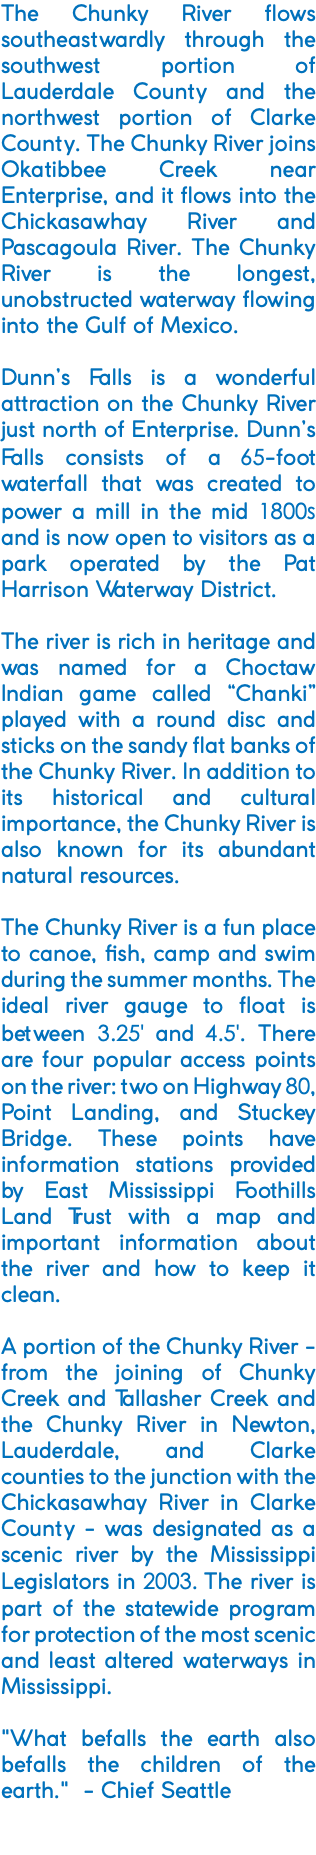 The Chunky River flows southeastwardly through the southwest portion of Lauderdale County and the northwest portion of Clarke County. The Chunky River joins Okatibbee Creek near Enterprise, and it flows into the Chickasawhay River and Pascagoula River. The Chunky River is the longest, unobstructed waterway flowing into the Gulf of Mexico. Dunn’s Falls is a wonderful attraction on the Chunky River just north of Enterprise. Dunn’s Falls consists of a 65-foot waterfall that was created to power a mill in the mid 1800s and is now open to visitors as a park operated by the Pat Harrison Waterway District. The river is rich in heritage and was named for a Choctaw Indian game called “Chanki” played with a round disc and sticks on the sandy flat banks of the Chunky River. In addition to its historical and cultural importance, the Chunky River is also known for its abundant natural resources. The Chunky River is a fun place to canoe, fish, camp and swim during the summer months. The ideal river gauge to float is between 3.25' and 4.5'. There are four popular access points on the river: two on Highway 80, Point Landing, and Stuckey Bridge. These points have information stations provided by East Mississippi Foothills Land Trust with a map and important information about the river and how to keep it clean. A portion of the Chunky River - from the joining of Chunky Creek and Tallasher Creek and the Chunky River in Newton, Lauderdale, and Clarke counties to the junction with the Chickasawhay River in Clarke County - was designated as a scenic river by the Mississippi Legislators in 2003. The river is part of the statewide program for protection of the most scenic and least altered waterways in Mississippi. "What befalls the earth also befalls the children of the earth." - Chief Seattle 